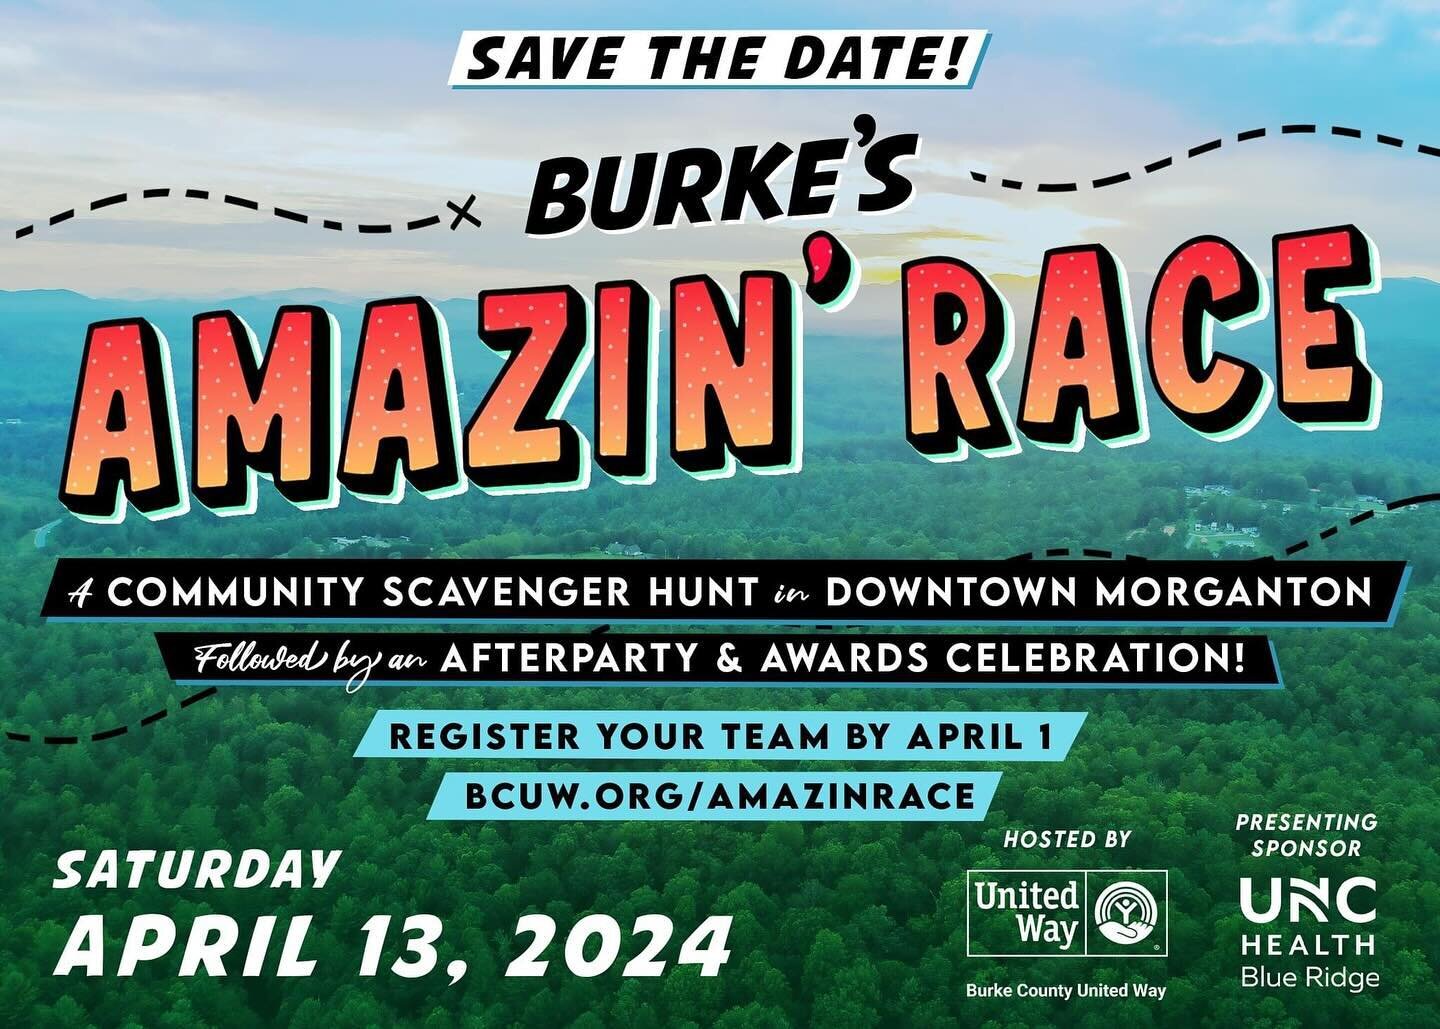 We are so excited for this! Let&rsquo;s get some #youngprofessionals teams together!
🏅Register your team by April 1st and learn more at https://www.bcuw.org/amazinrace (link in bio)
📍Burke&rsquo;s Amazin&rsquo; Race is coming up on Saturday, April 